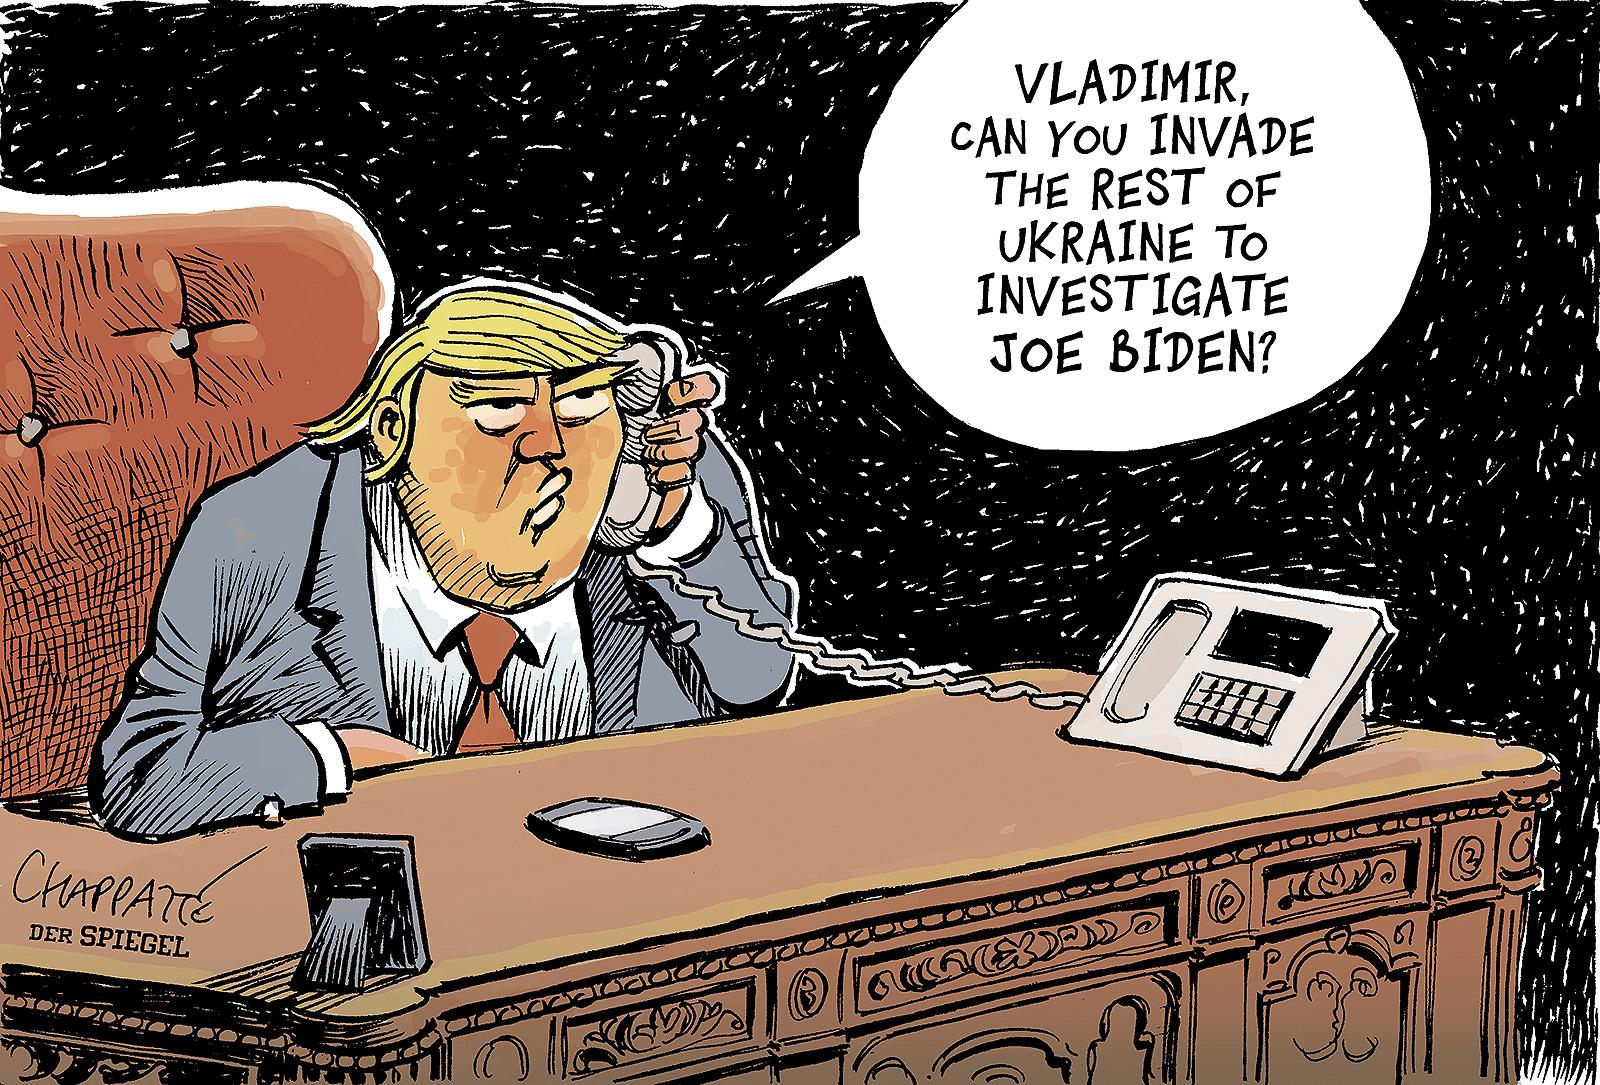 Trump's phone calls to foreign leaders